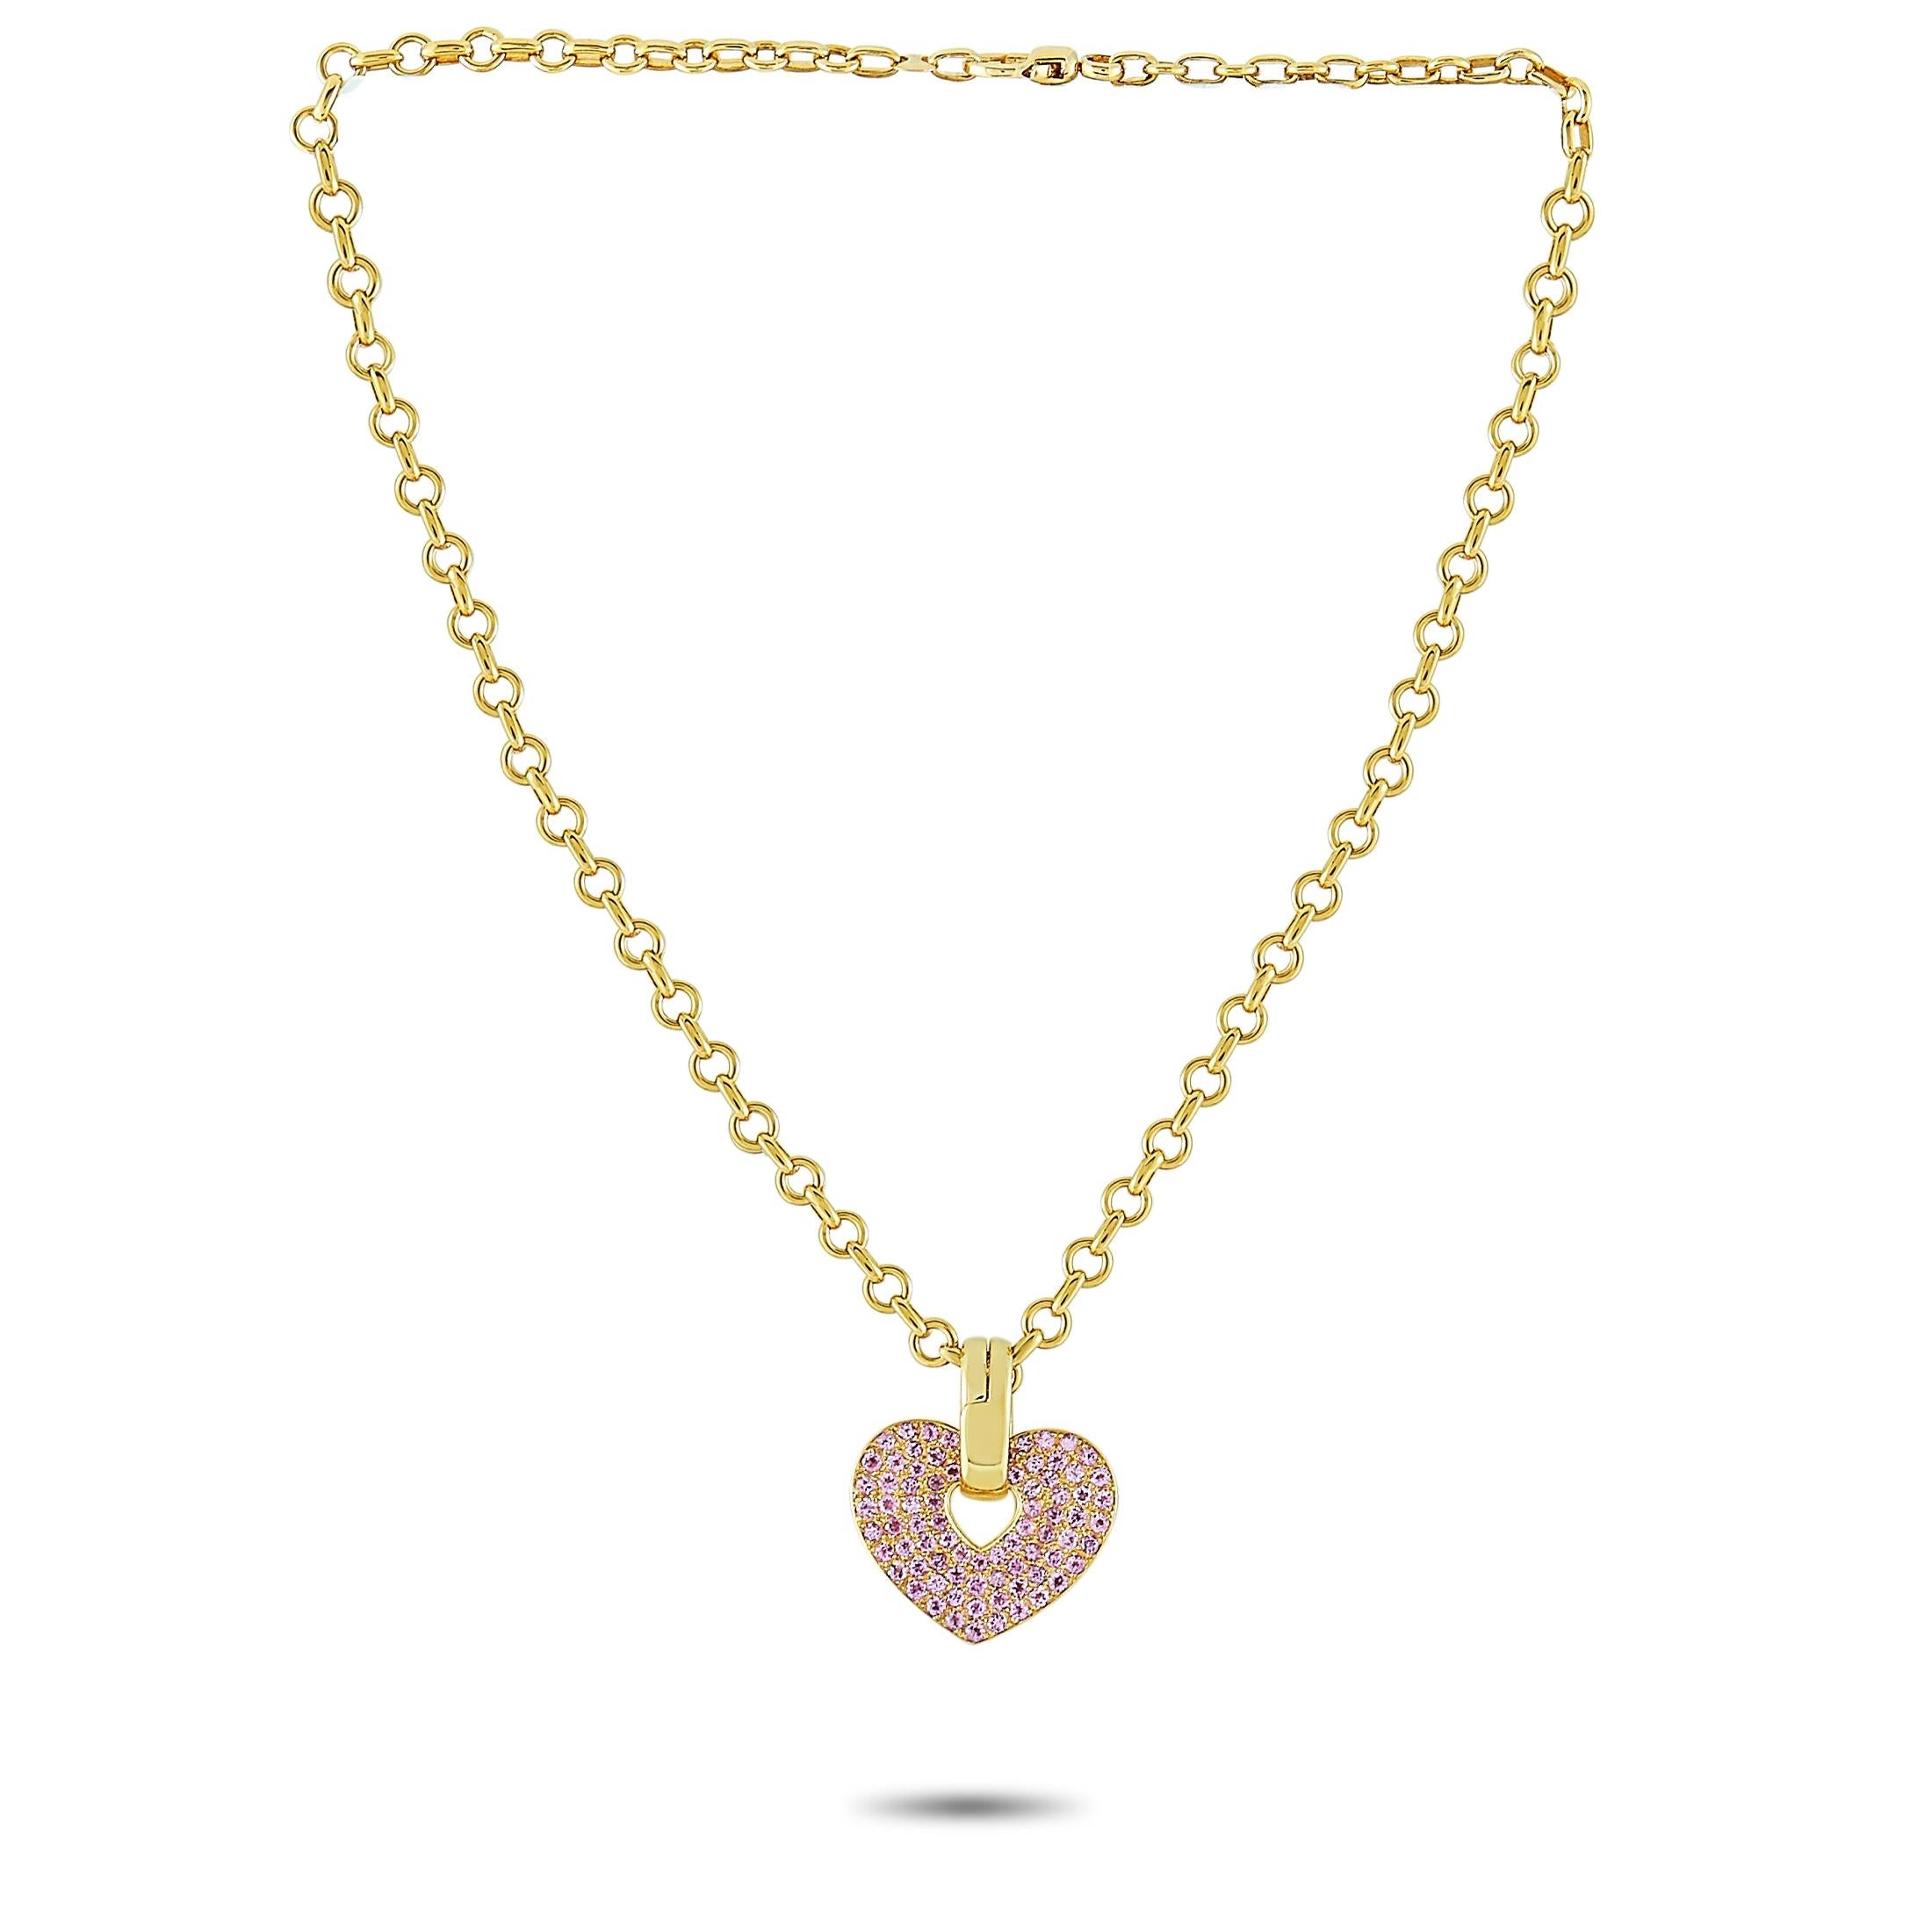 This Poiray necklace is made of 18K yellow gold and embellished with pink sapphires. The necklace weighs 40.5 grams and is presented with a 16” chain, featuring a heart pendant that measures 1.25” in length and 1.12” in width.
 
 Offered in estate